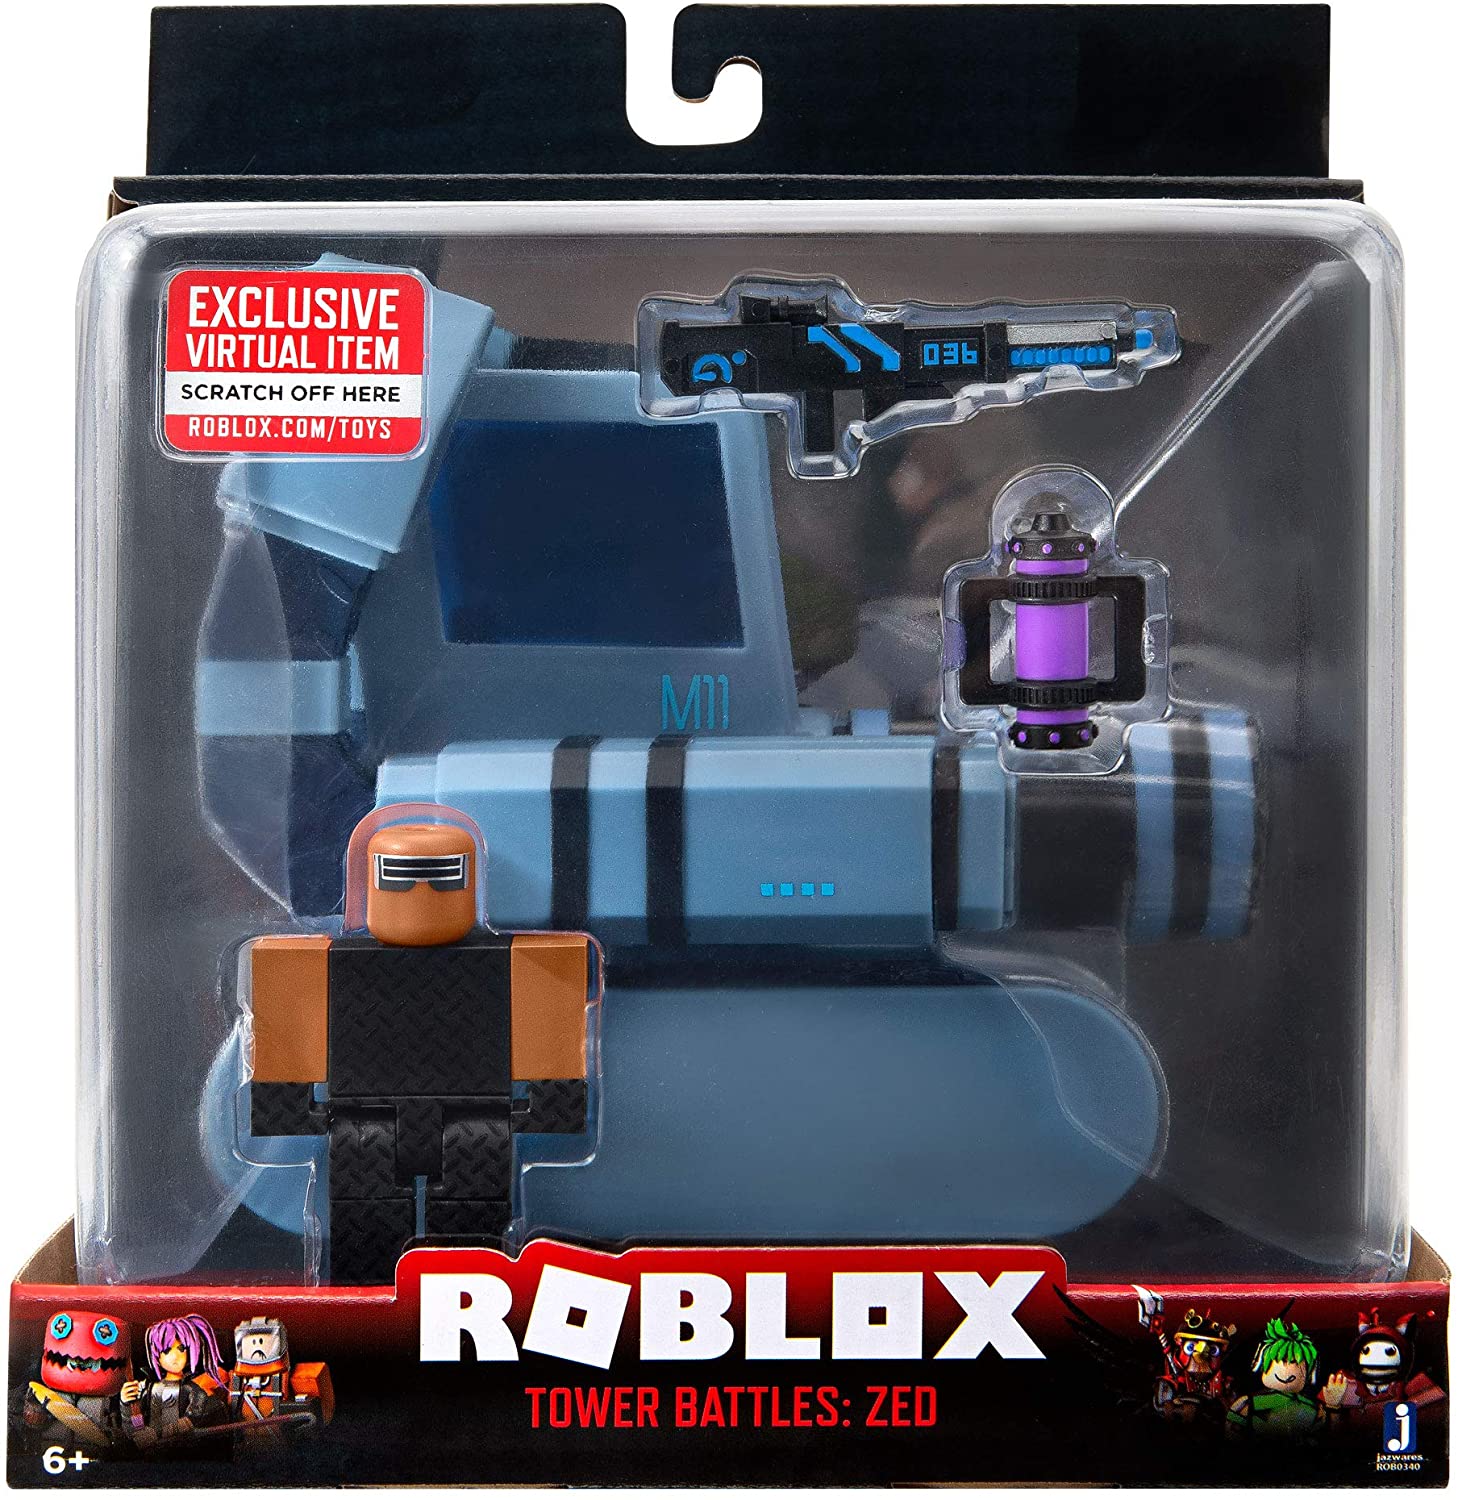 Roblox Action Collection - Zombie Takeover Value Box [Includes